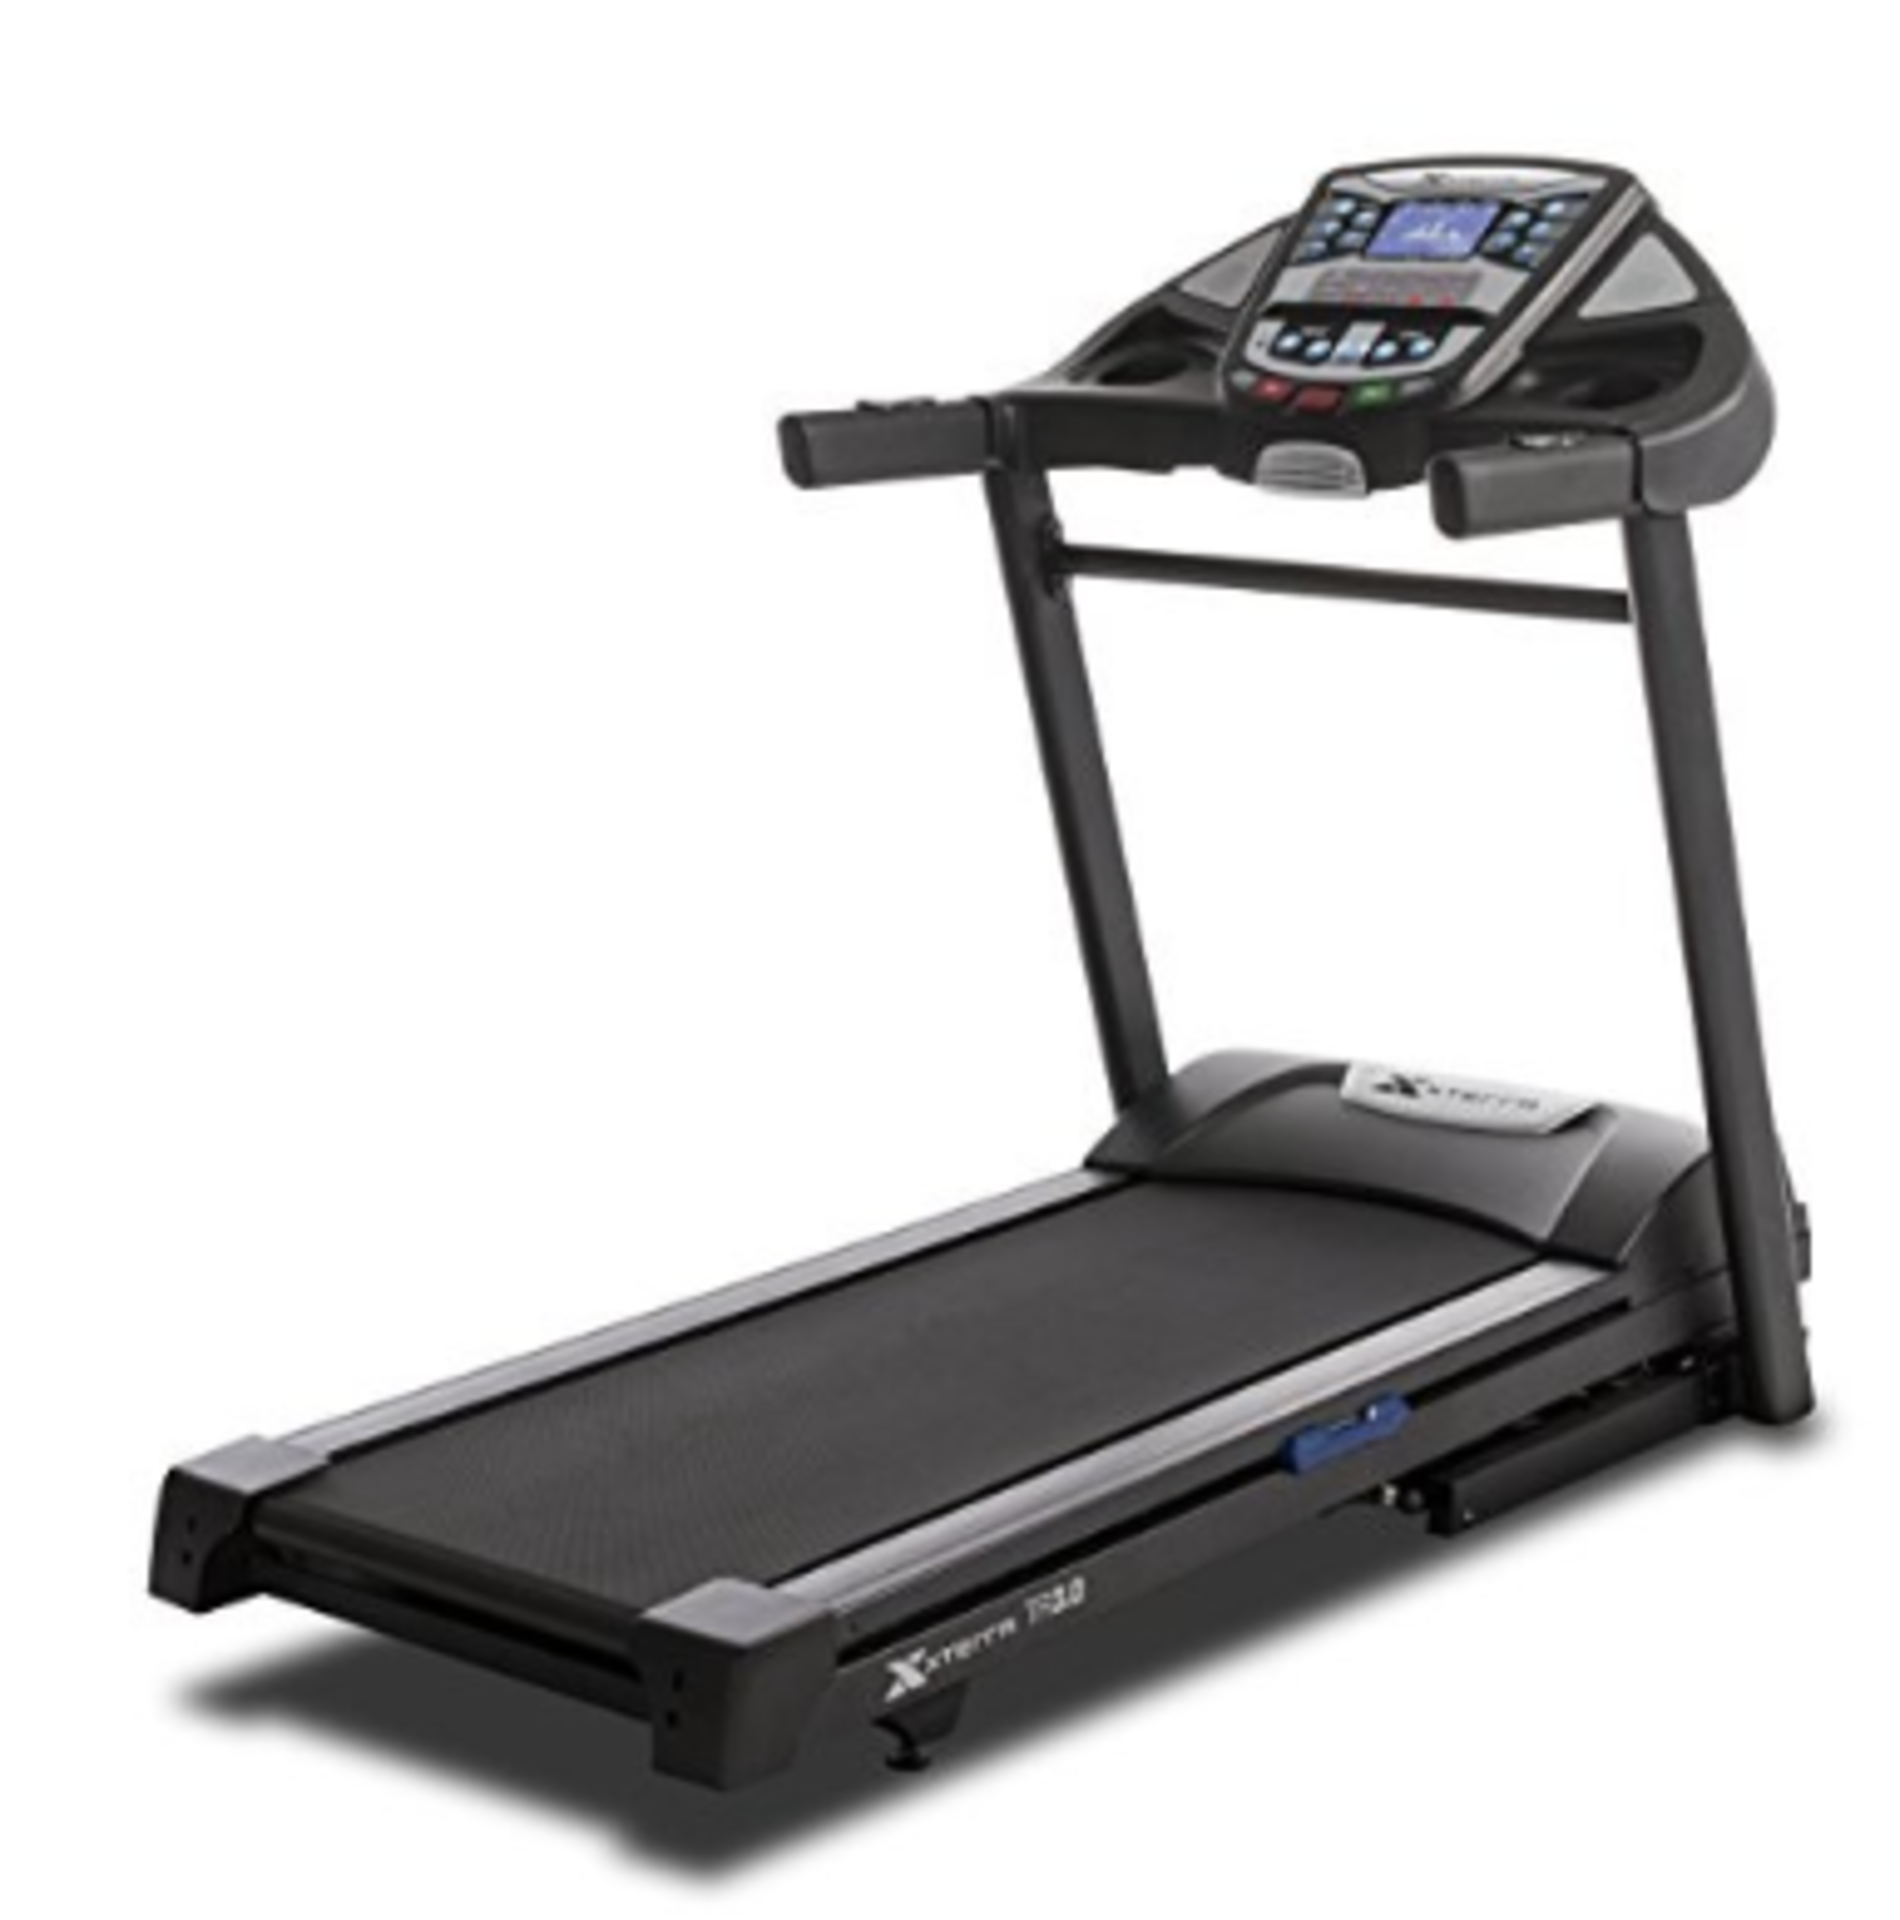 XxTerra - TR3.0 Treadmill - Unchecked & Boxed. - Viewing Recommended. RRP £599.99